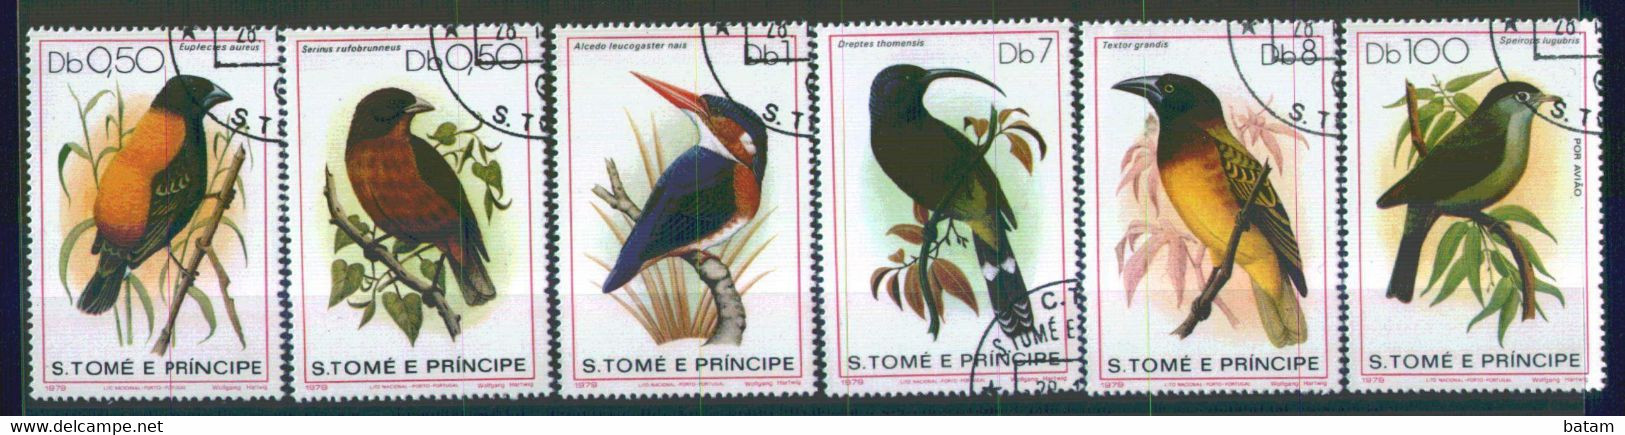 210 - Sao Tome And Principe 1979 - Bids - Used Set - Collections, Lots & Series